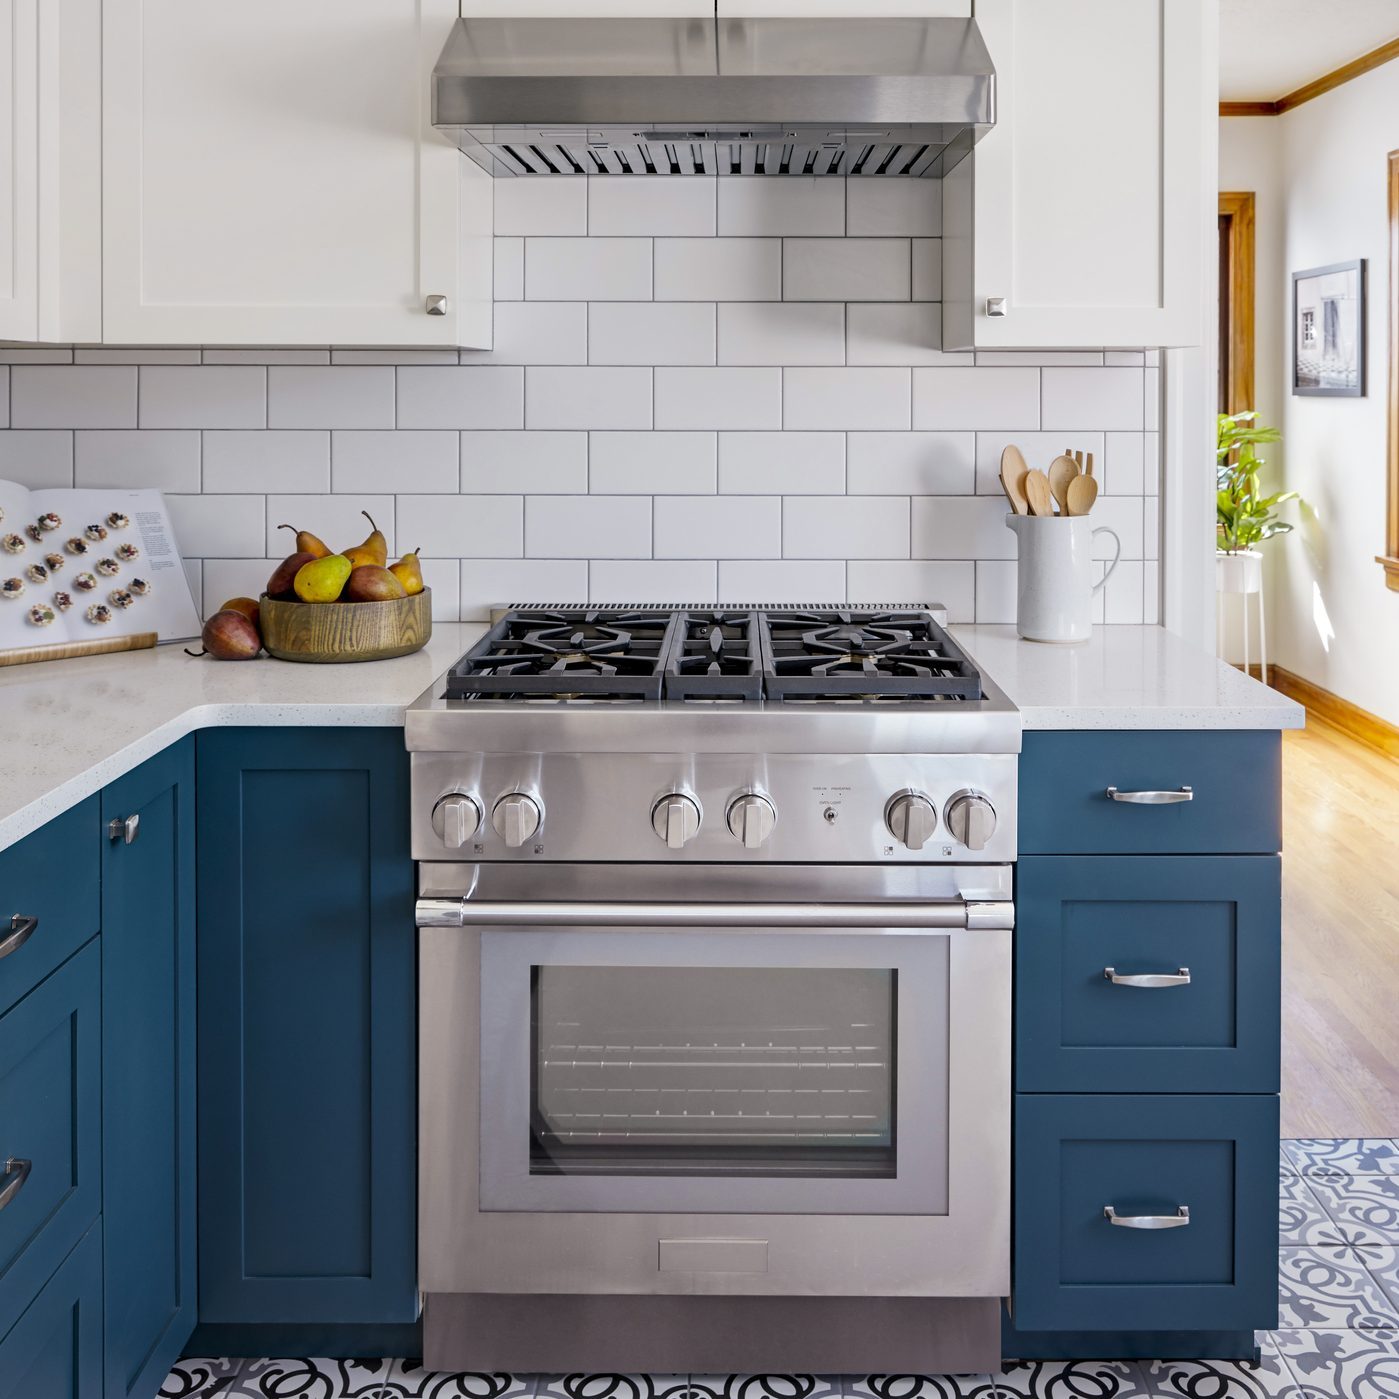 View of a gas stove in a cozy kitchen